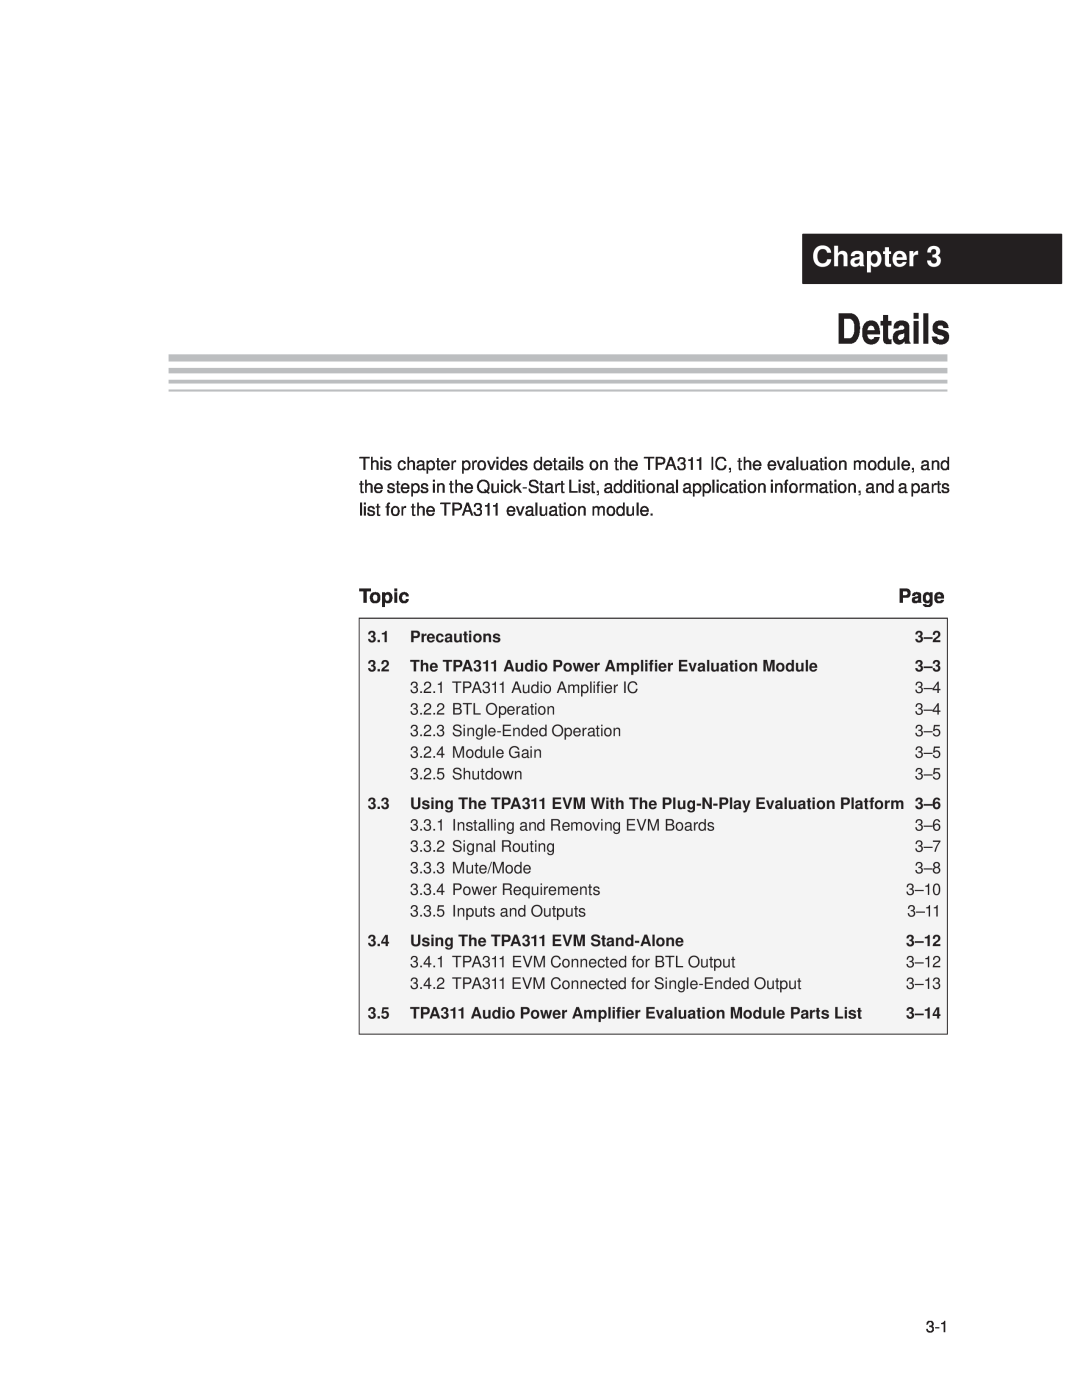 Texas Instruments TPA 311 manual Details, Chapter, Page, Topic 